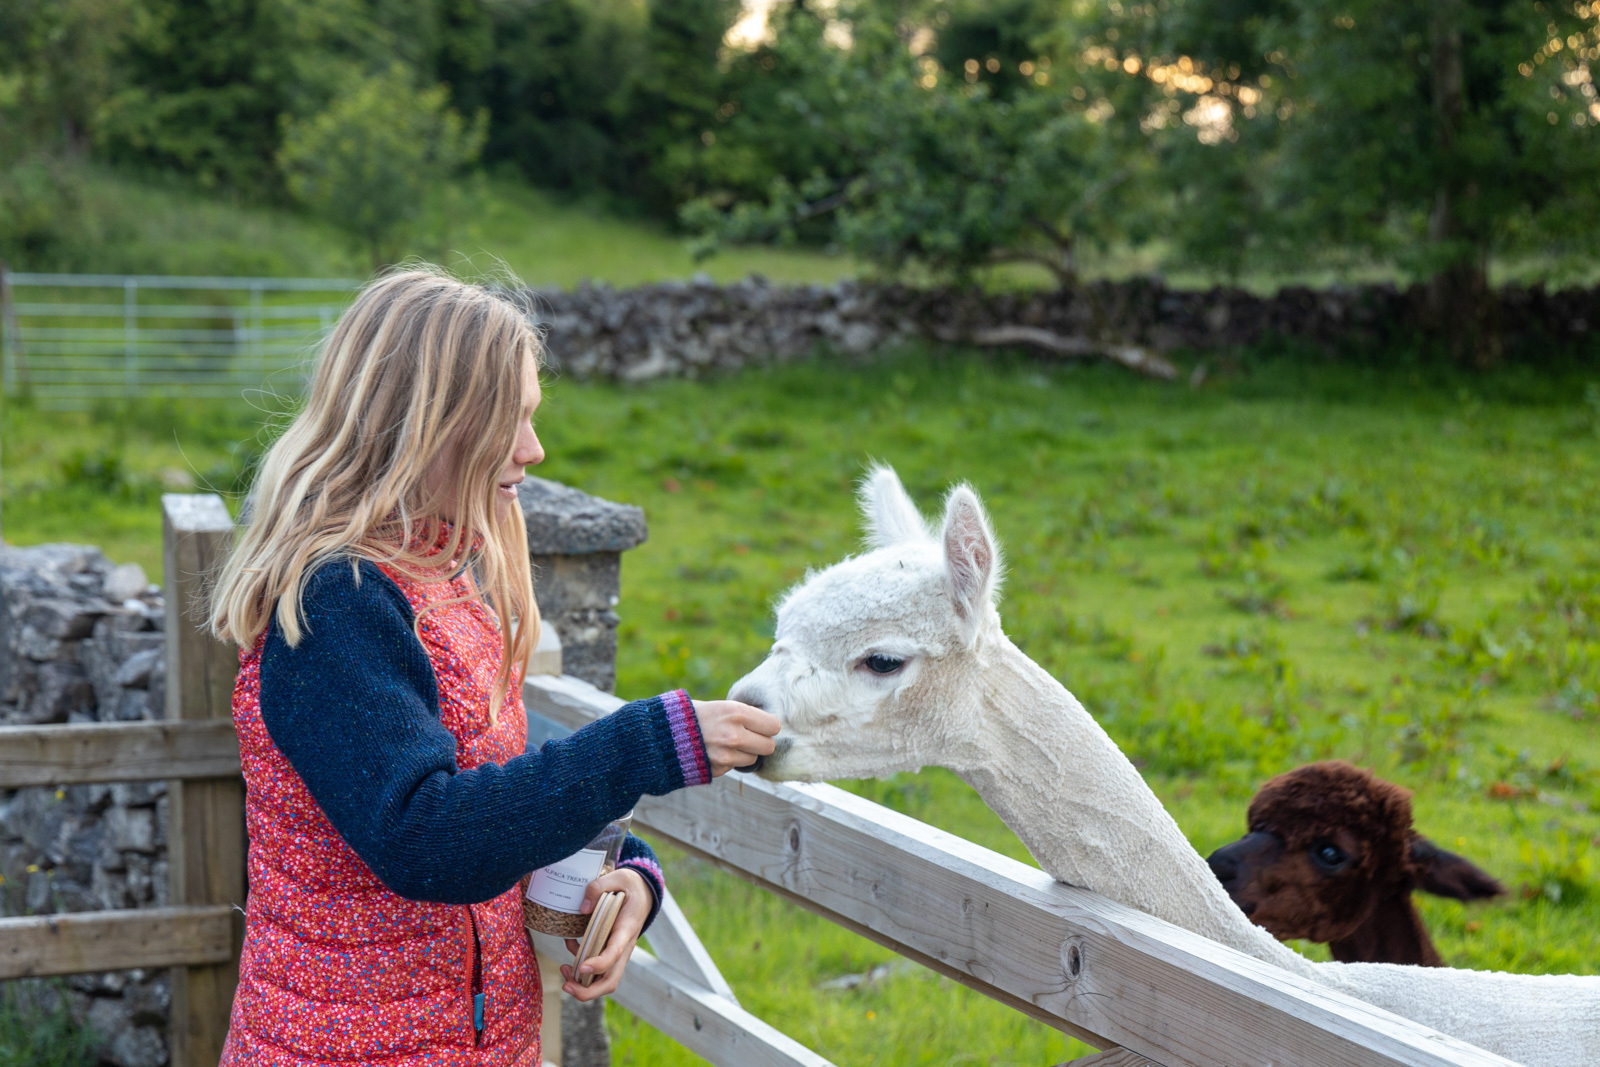 Auto-generated description: A girl is feeding a white alpaca over a wooden fence, with another brown alpaca in the background.